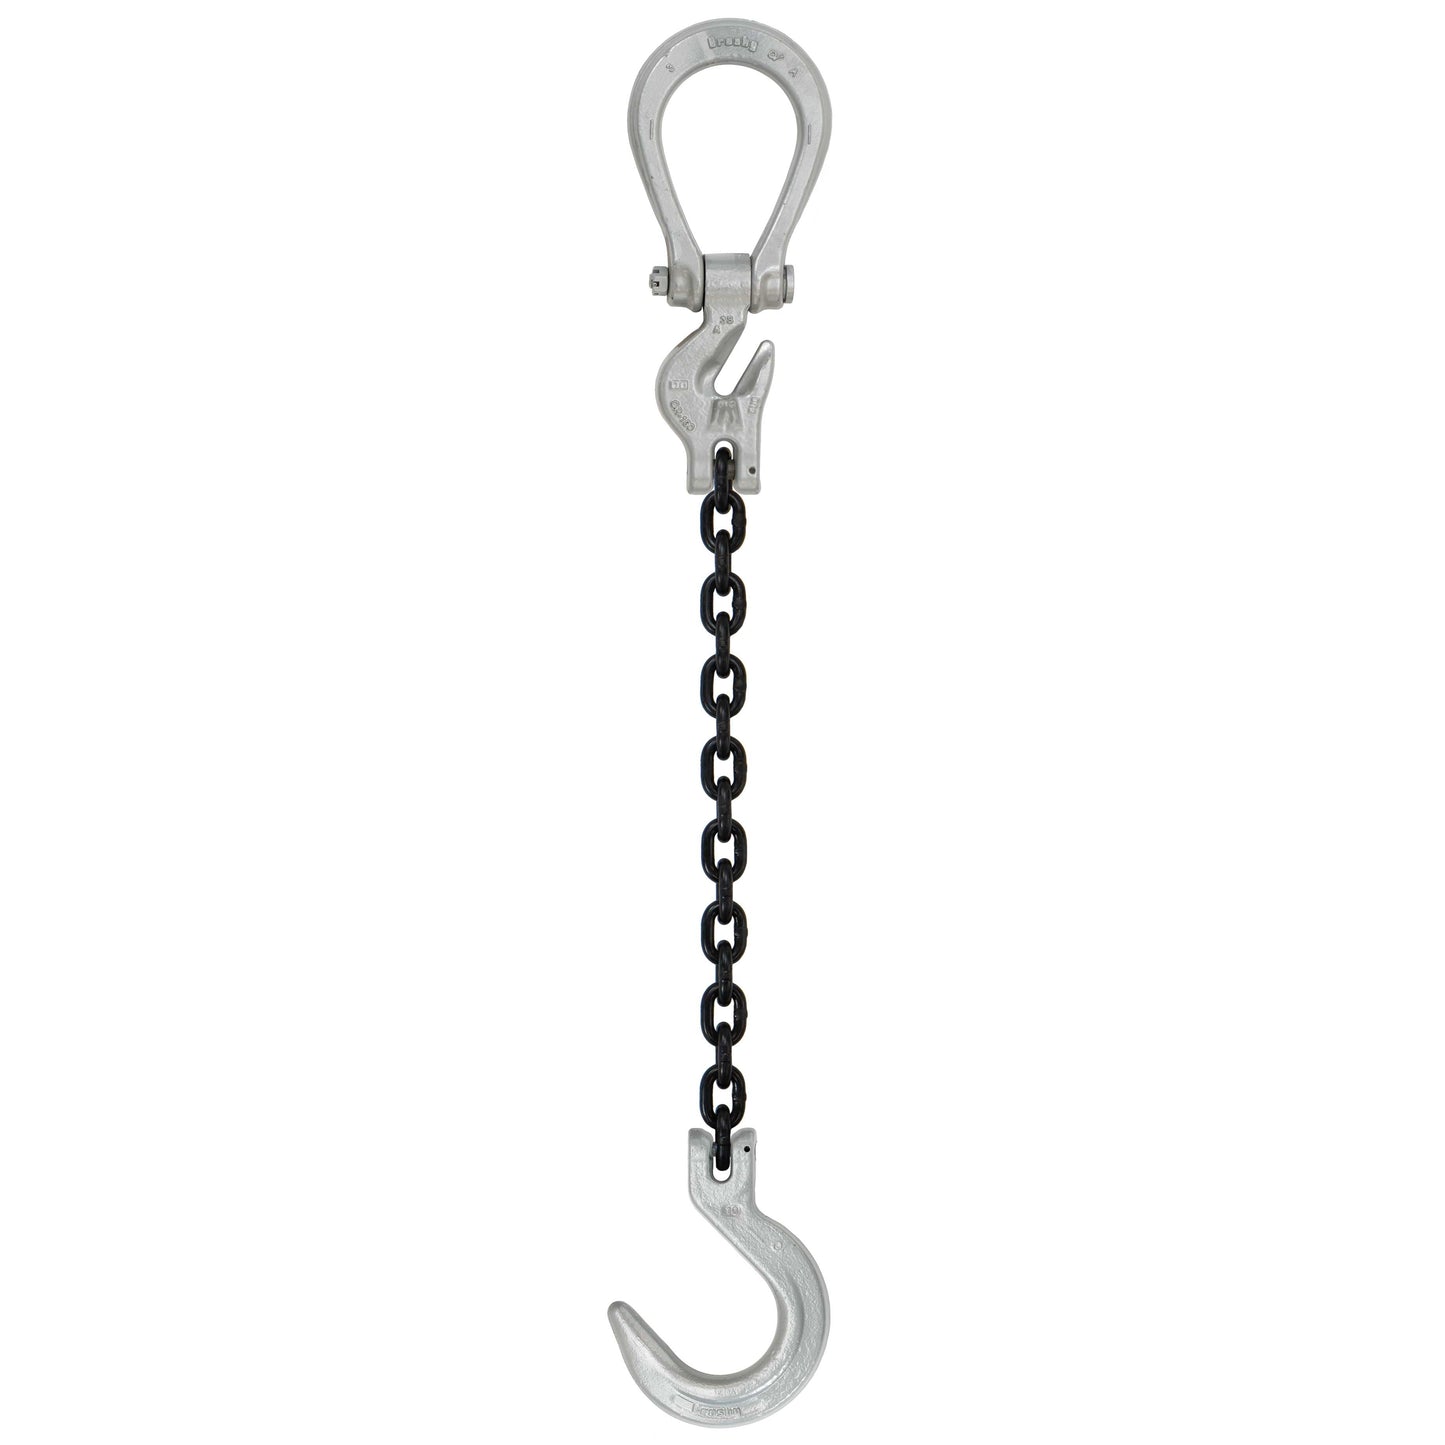 932 inch x 10 foot Domestic Adjustable Single Leg Chain Sling w Crosby Foundry Hook Grade 100 image 1 of 2